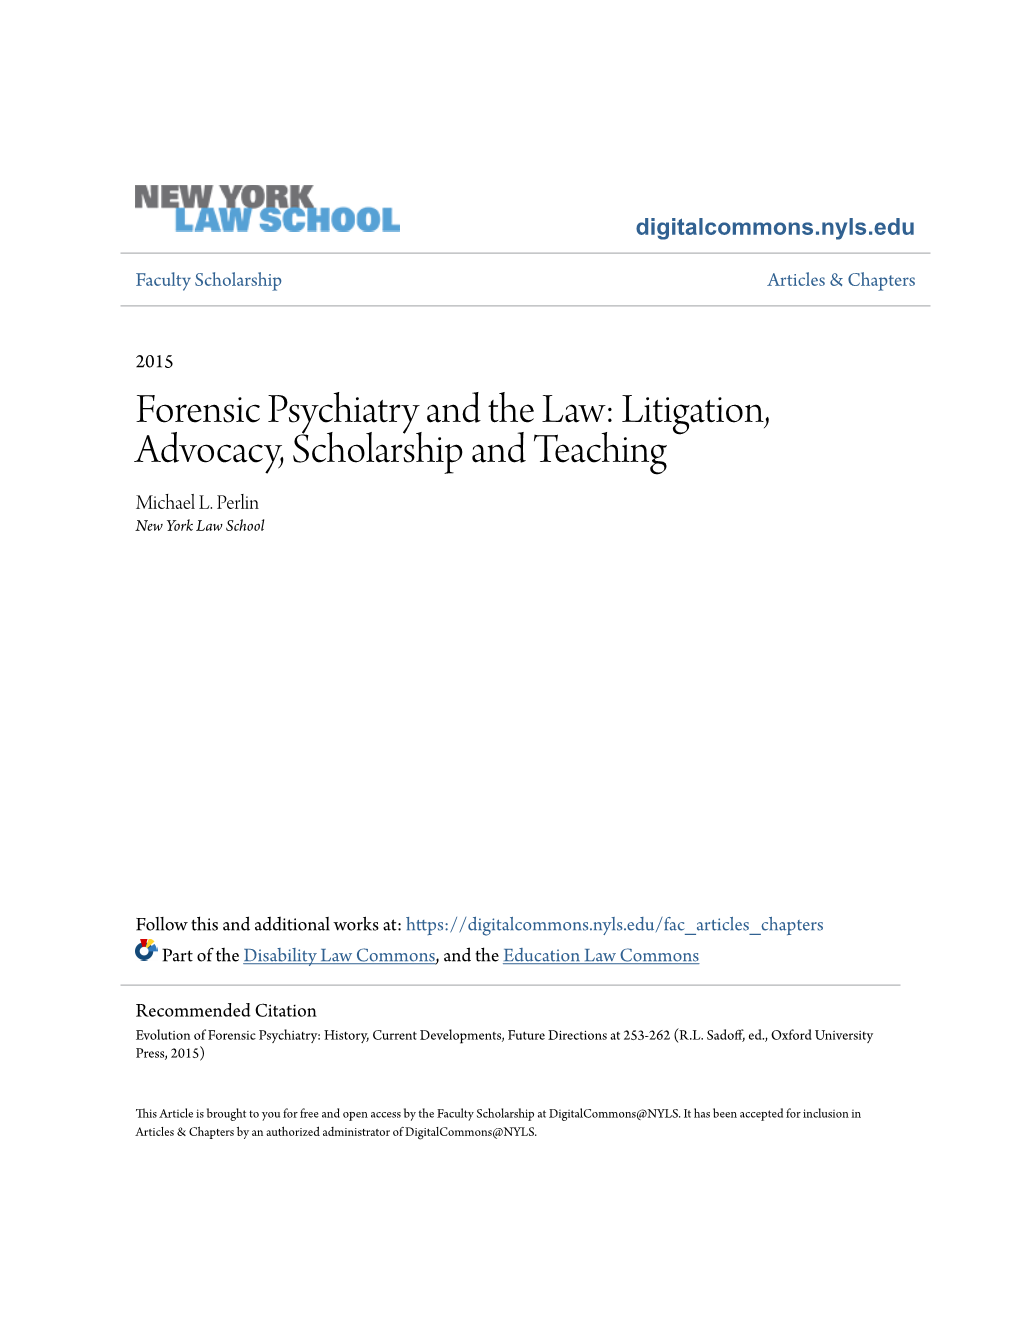 Forensic Psychiatry and the Law: Litigation, Advocacy, Scholarship and Teaching Michael L